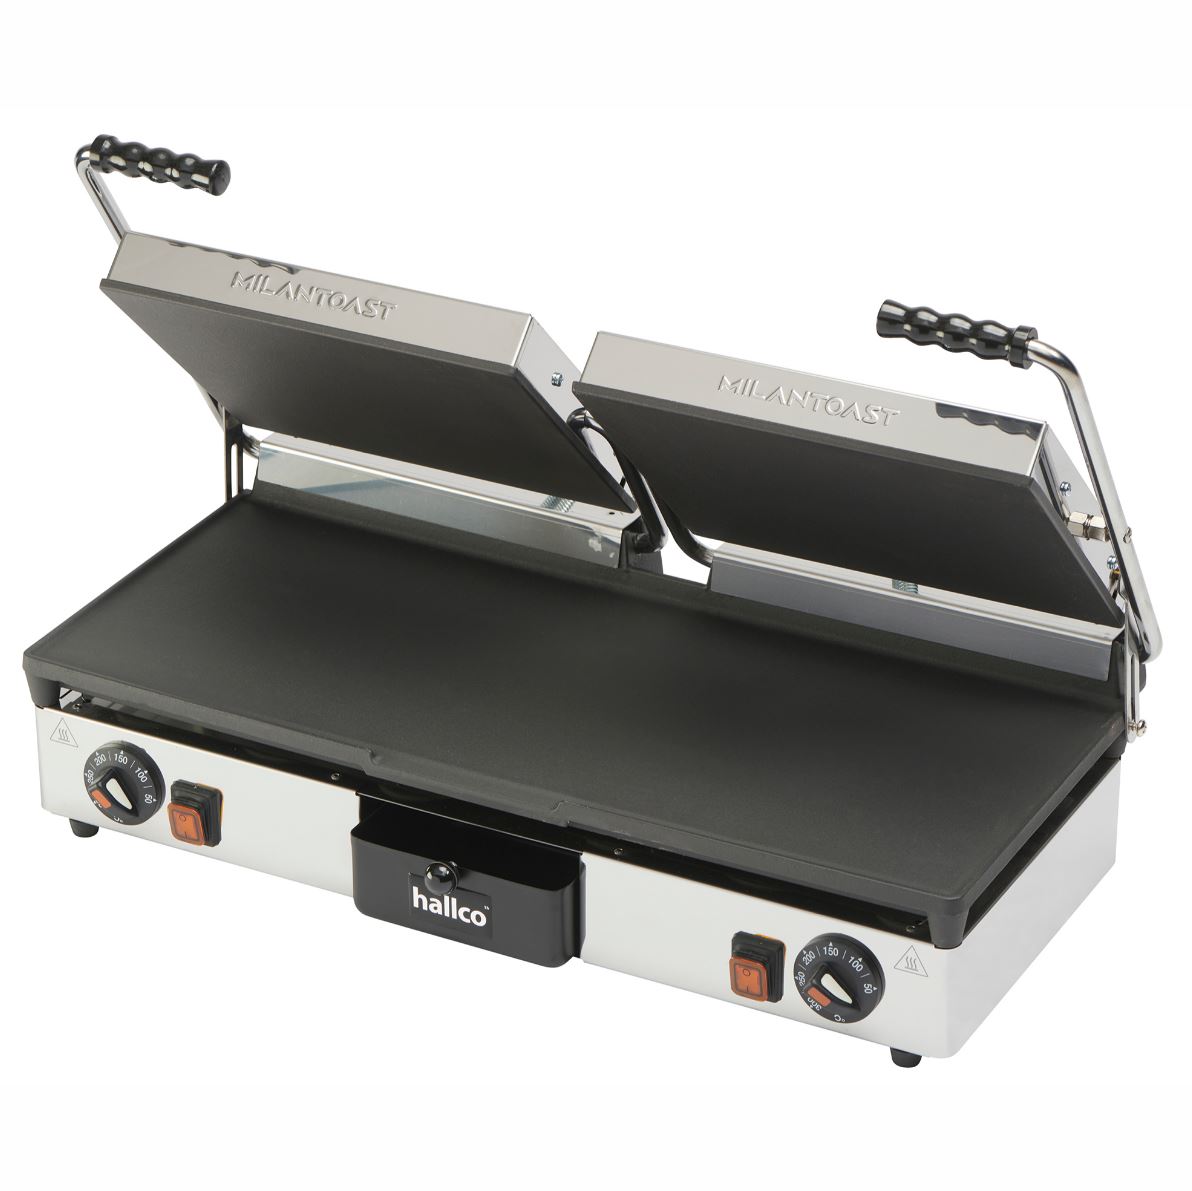 Hallco Contact Grill Specifications